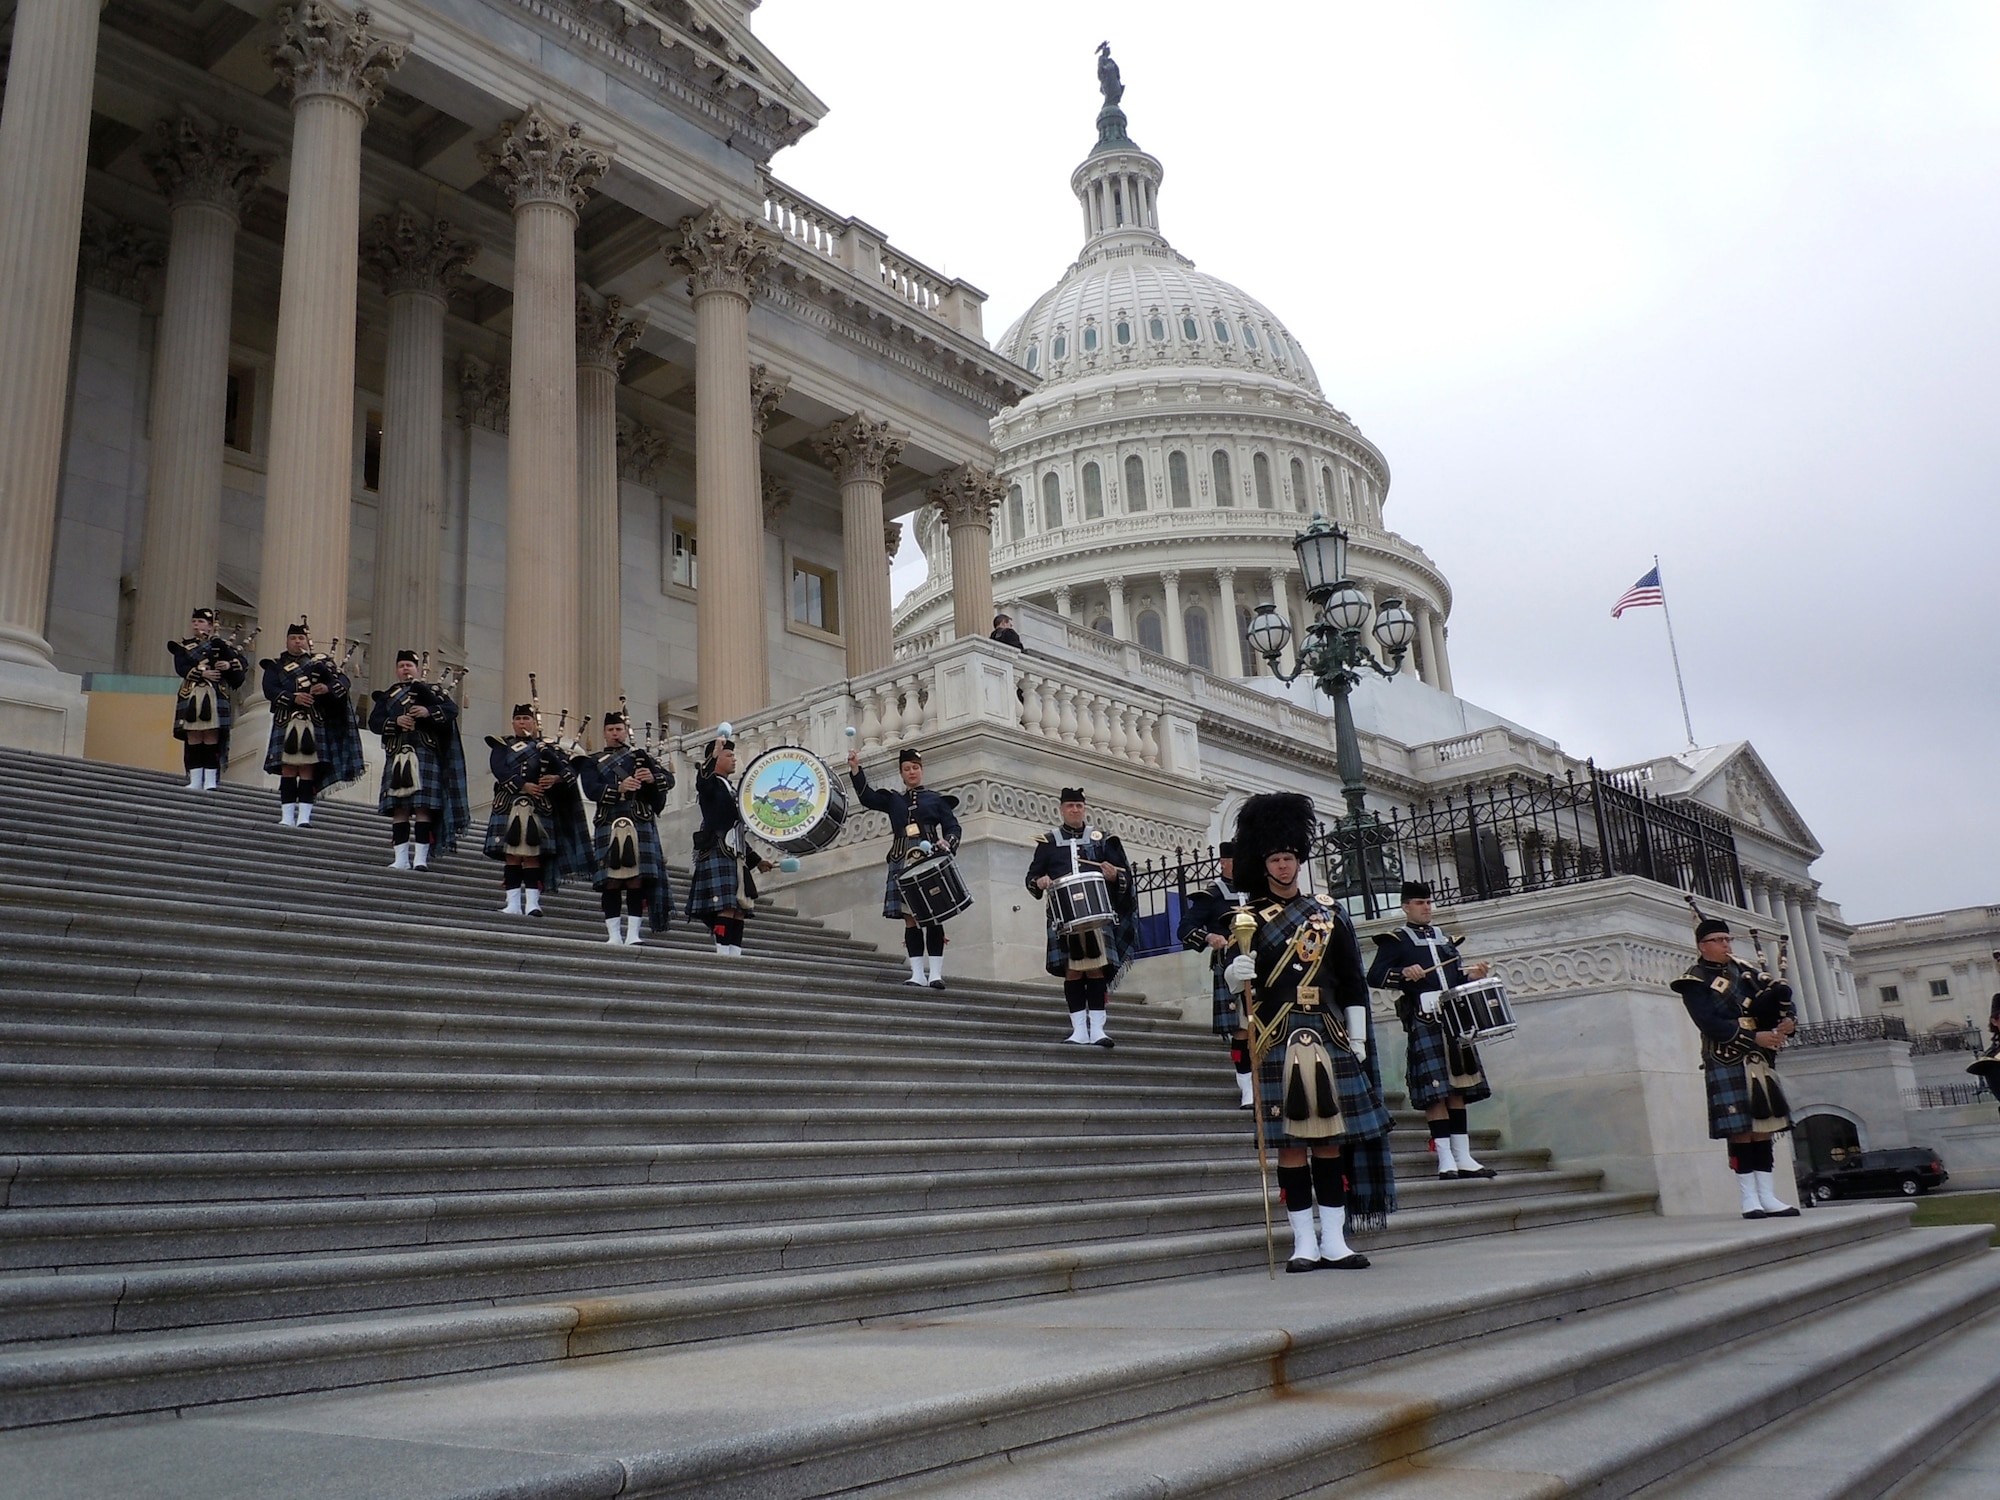 The Band of the Air Force Reserve's pipe band performs on the steps of the Capitol building March 20, 2012, in Washington, D.C. They performed four missions for President Barack Obama and Irish Prime Minister Enda Kenny. The pipers have performed this mission every year since 1995, Elements of the Reserve band perform an average of 279 missions annually in support of Regular Air Force and Air Force Reserve mission taskings. (U.S. Air Force photo by Chief Master Sgt. Mark Burditt)